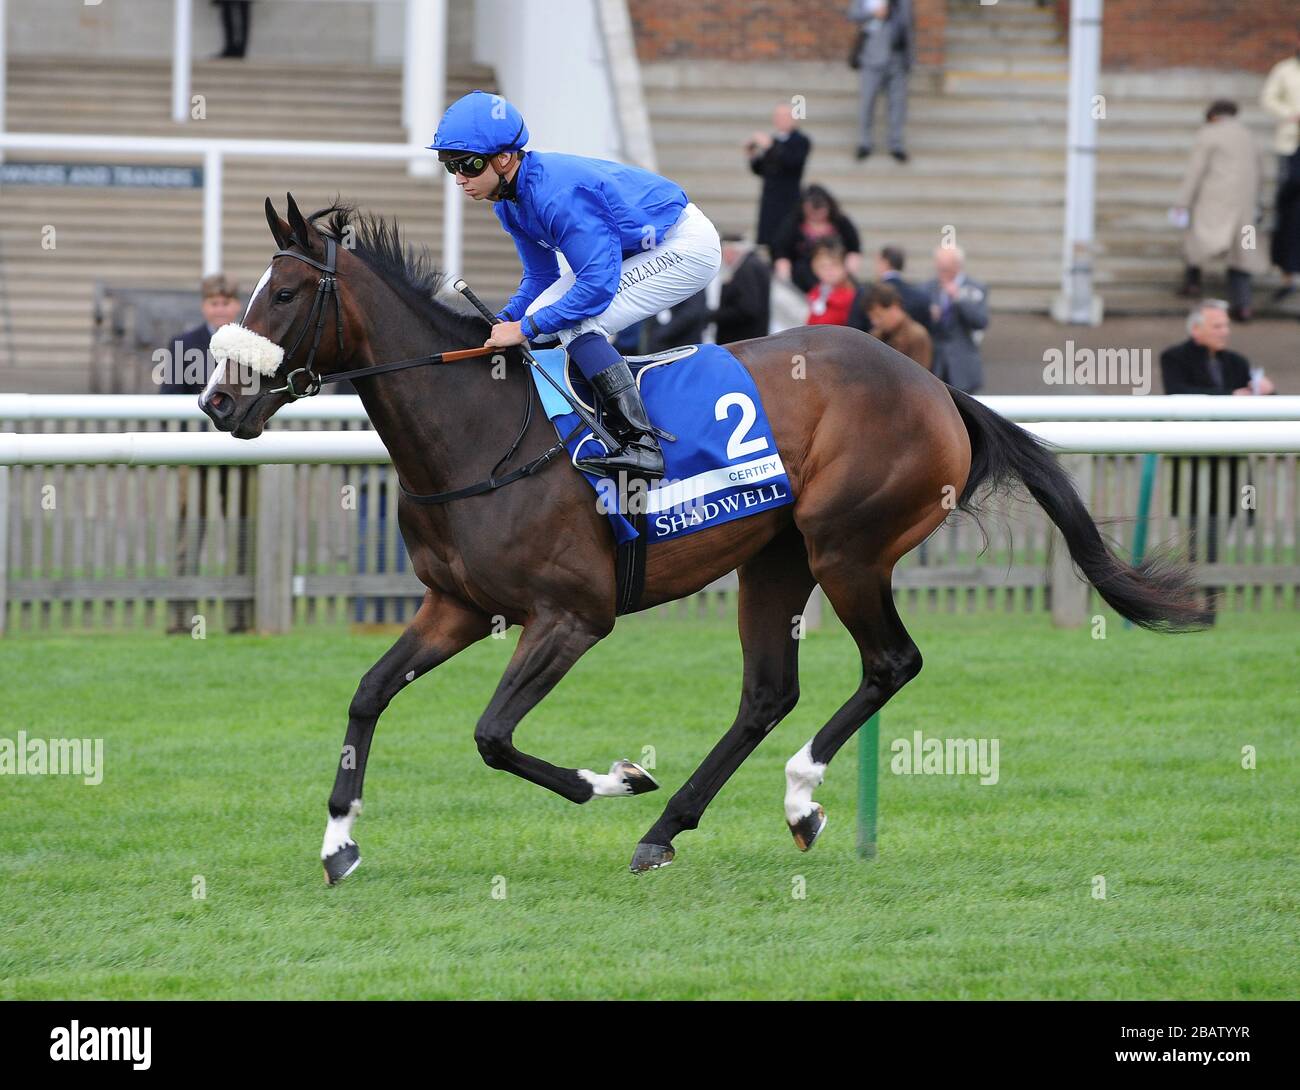 Certify ridden by Mickael Barzalona in the Shadwell Fillies' Mile (Group 1) Stock Photo